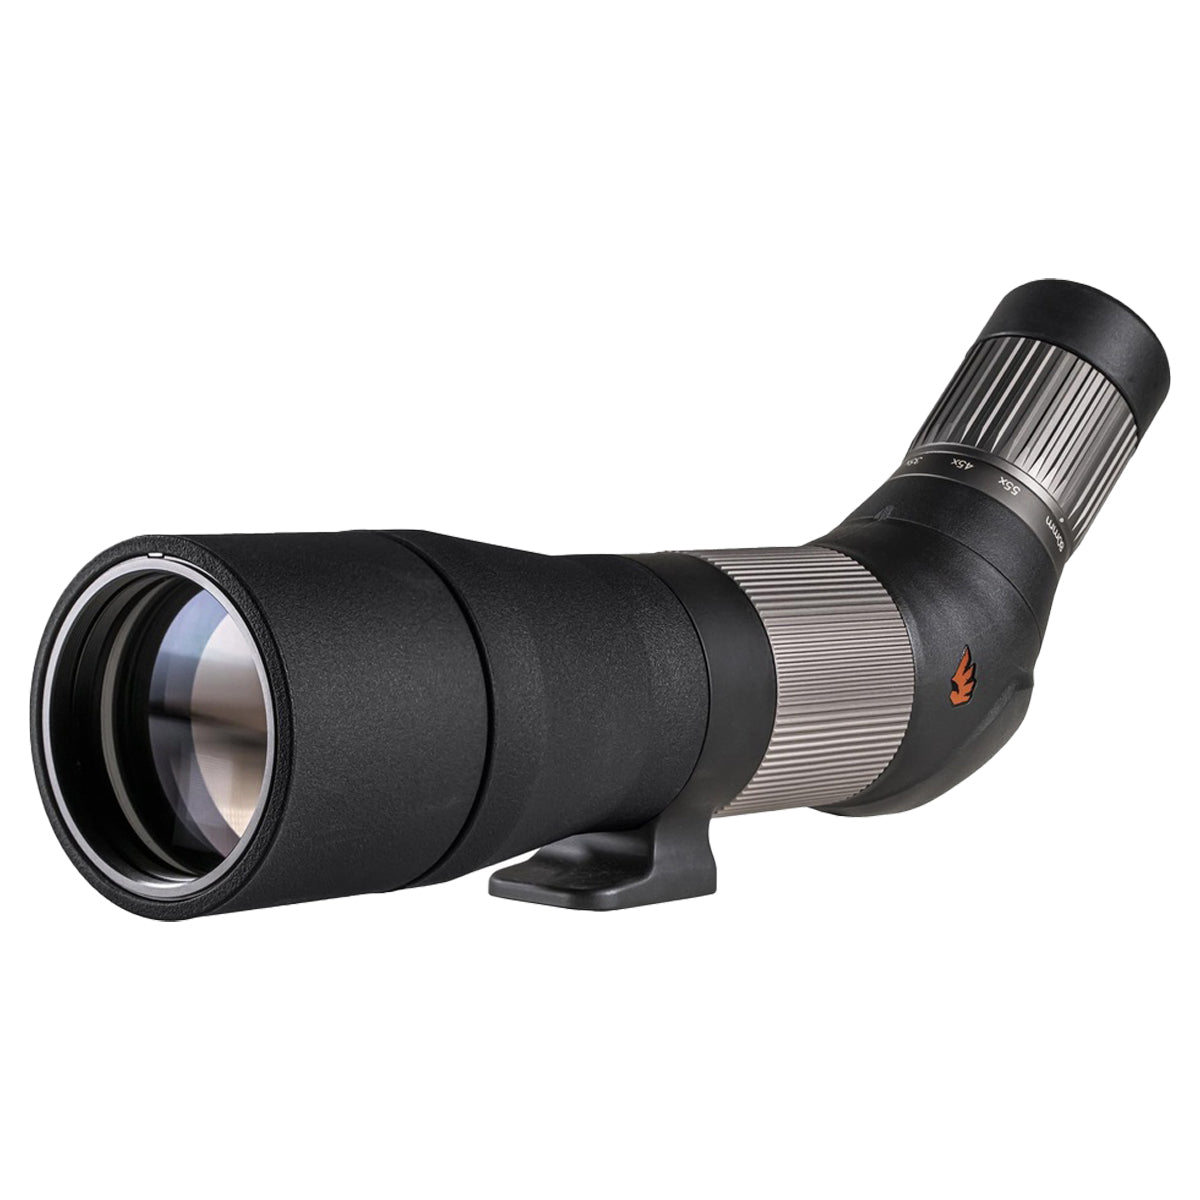 Gunwerks Revic Acura S65a Angled Spotting Scope in  by GOHUNT | Revic - GOHUNT Shop